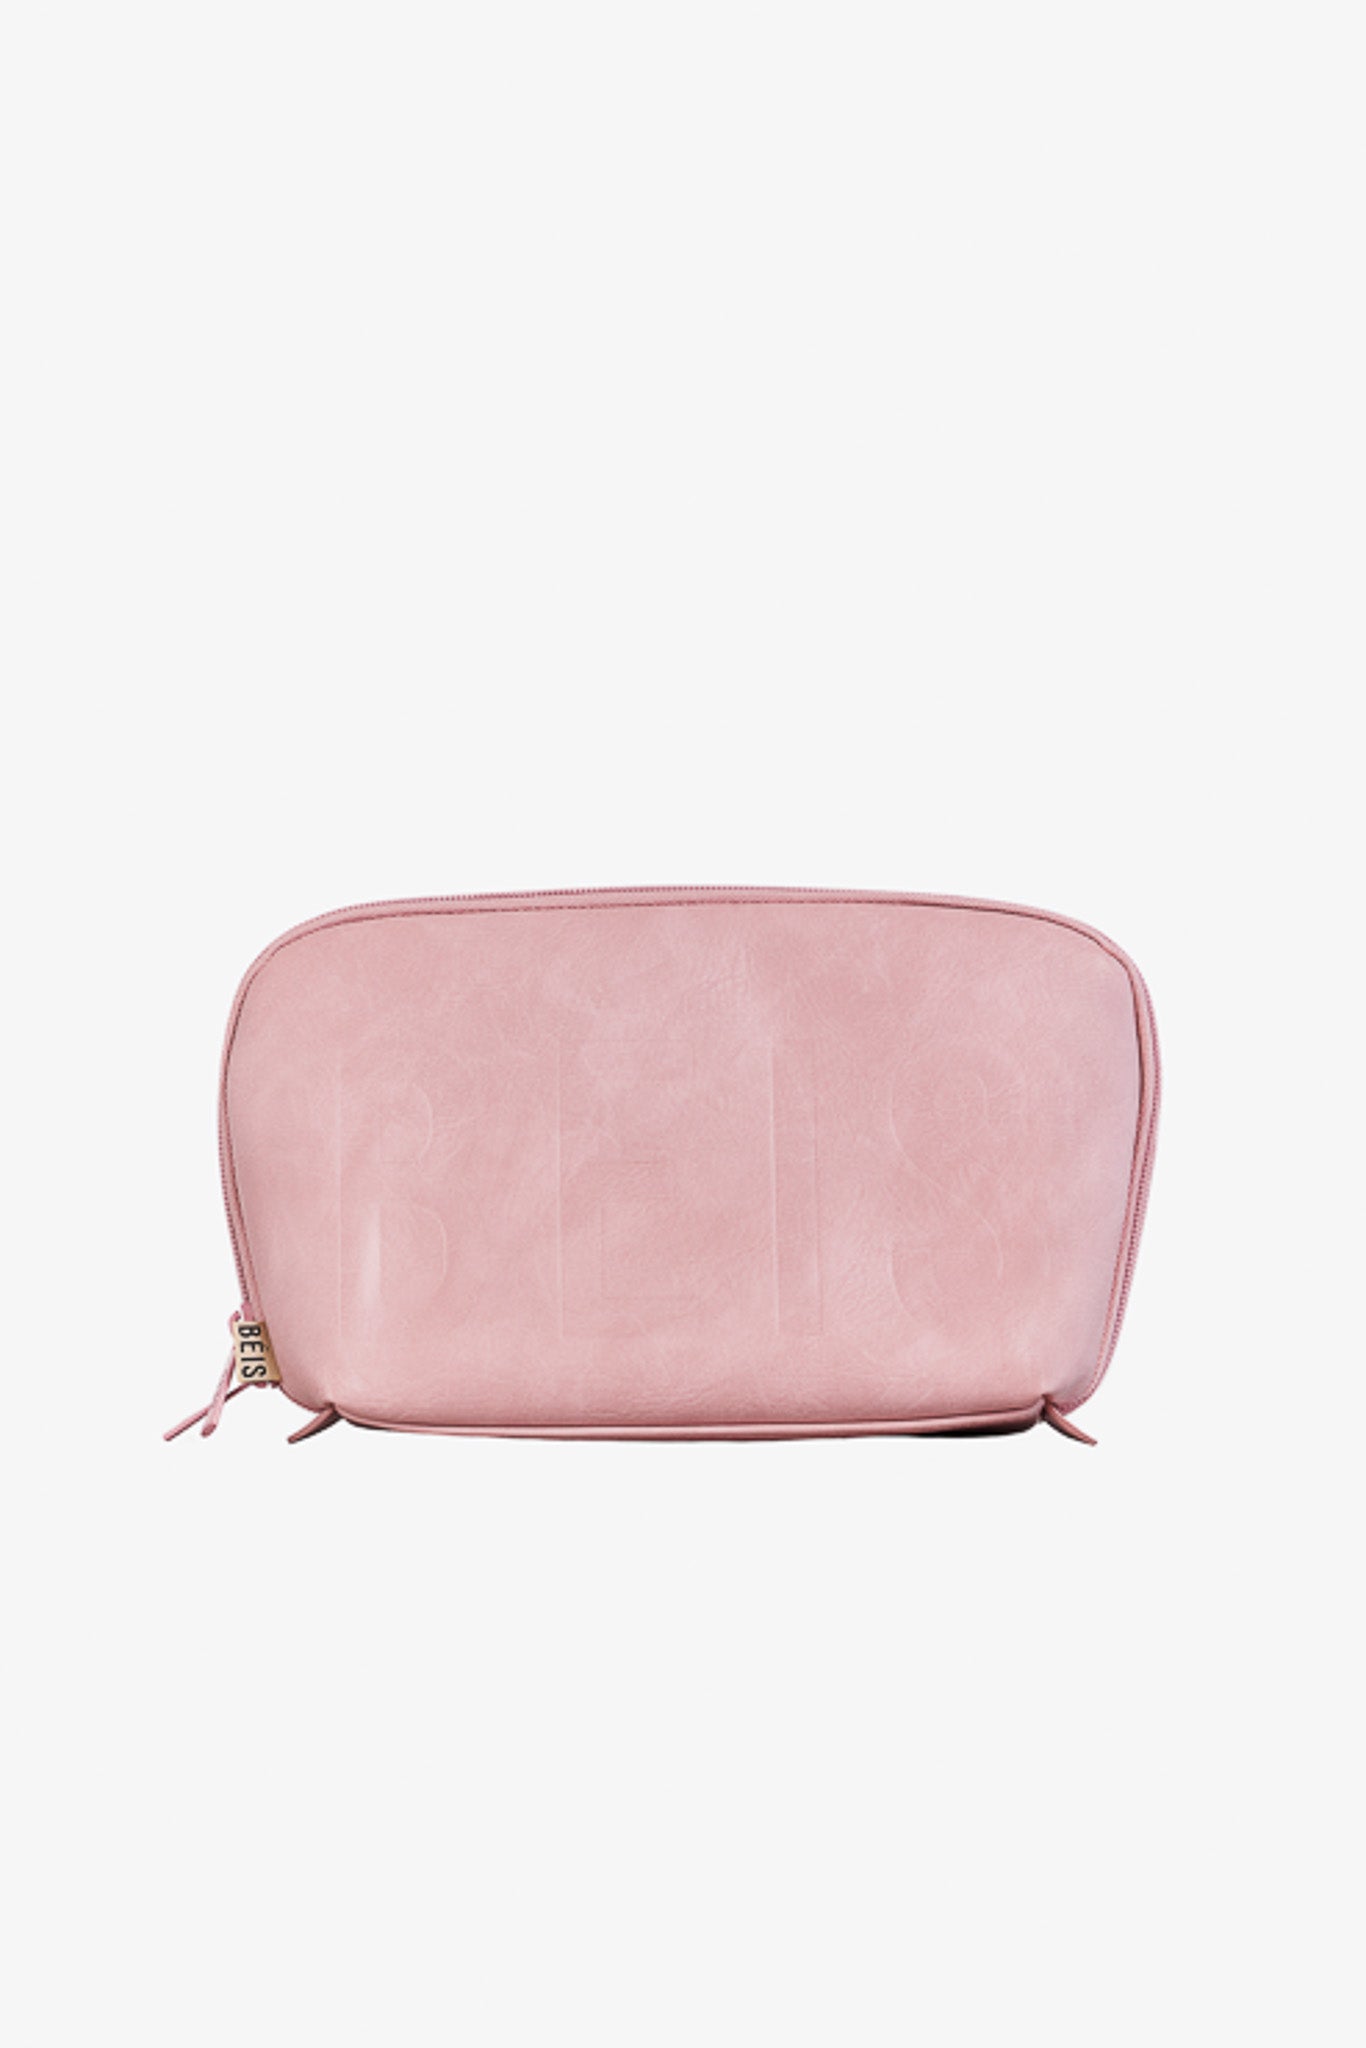 The Cosmetic Pouch Set in Atlas Pink